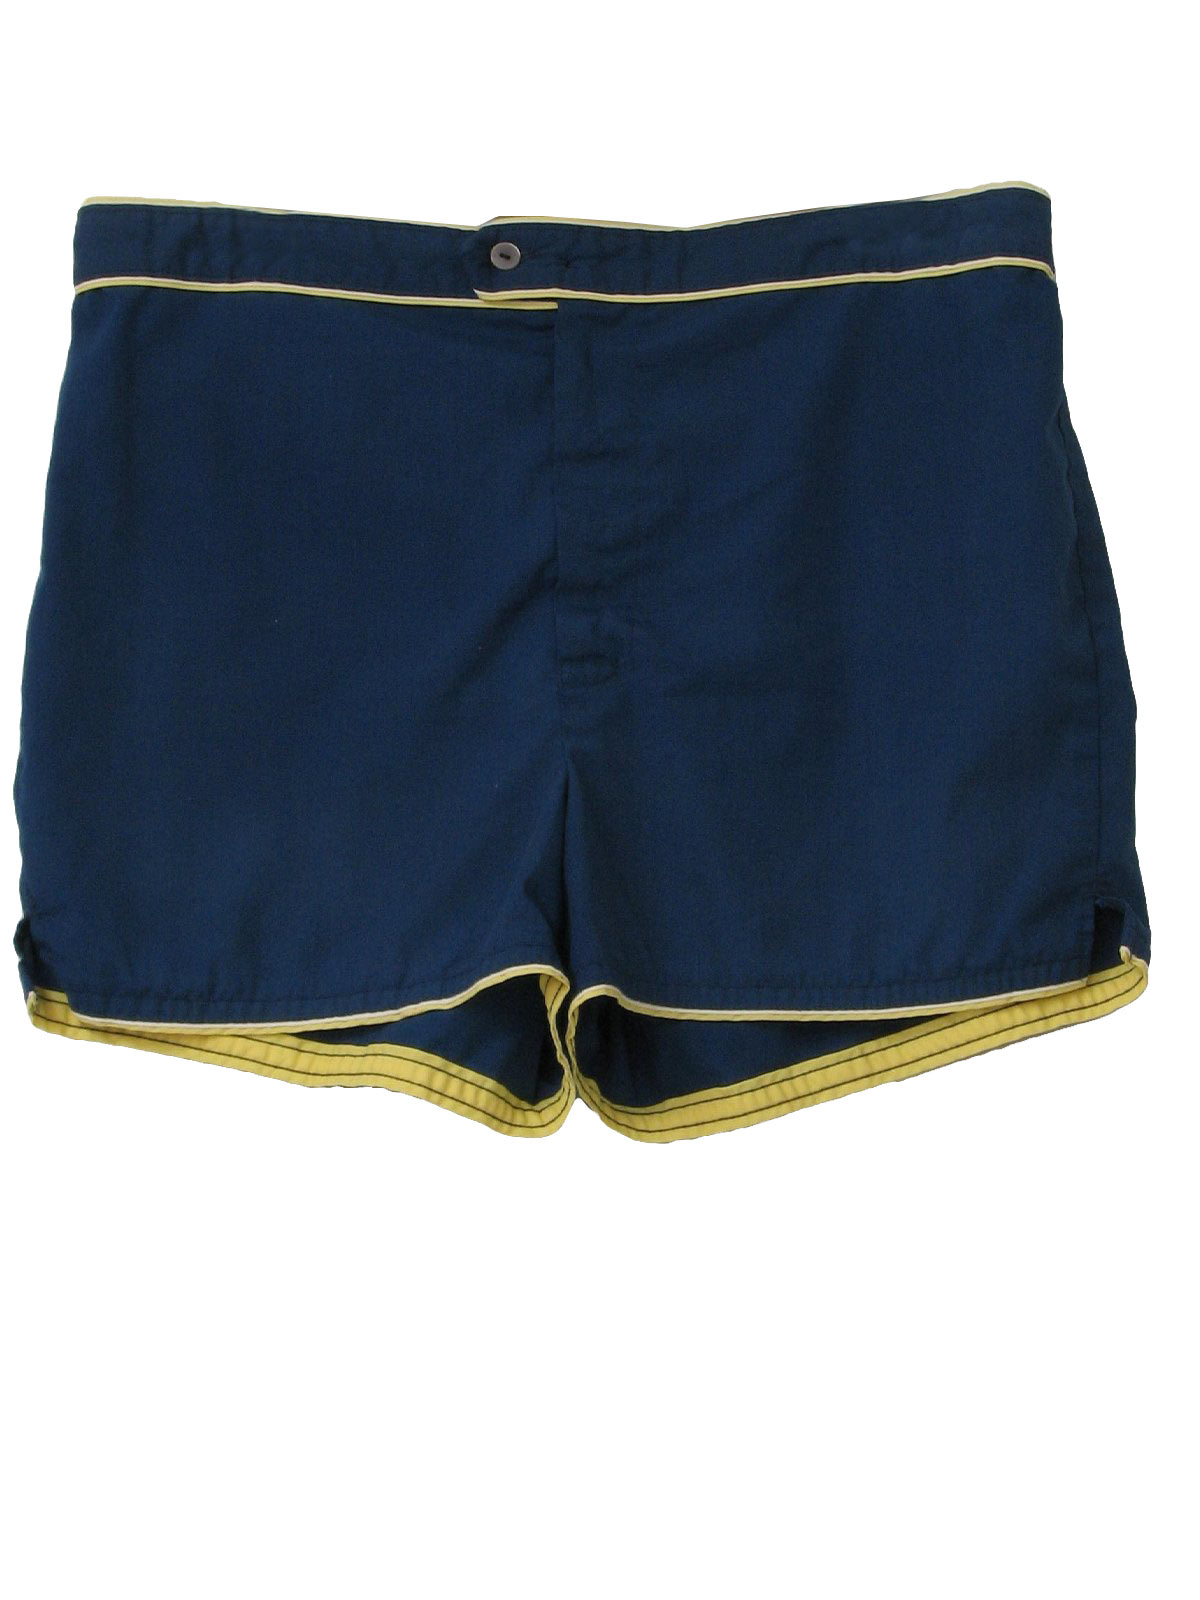 1970s Shorts: 70s -no label- Mens navy blue, yellow and white cotton ...